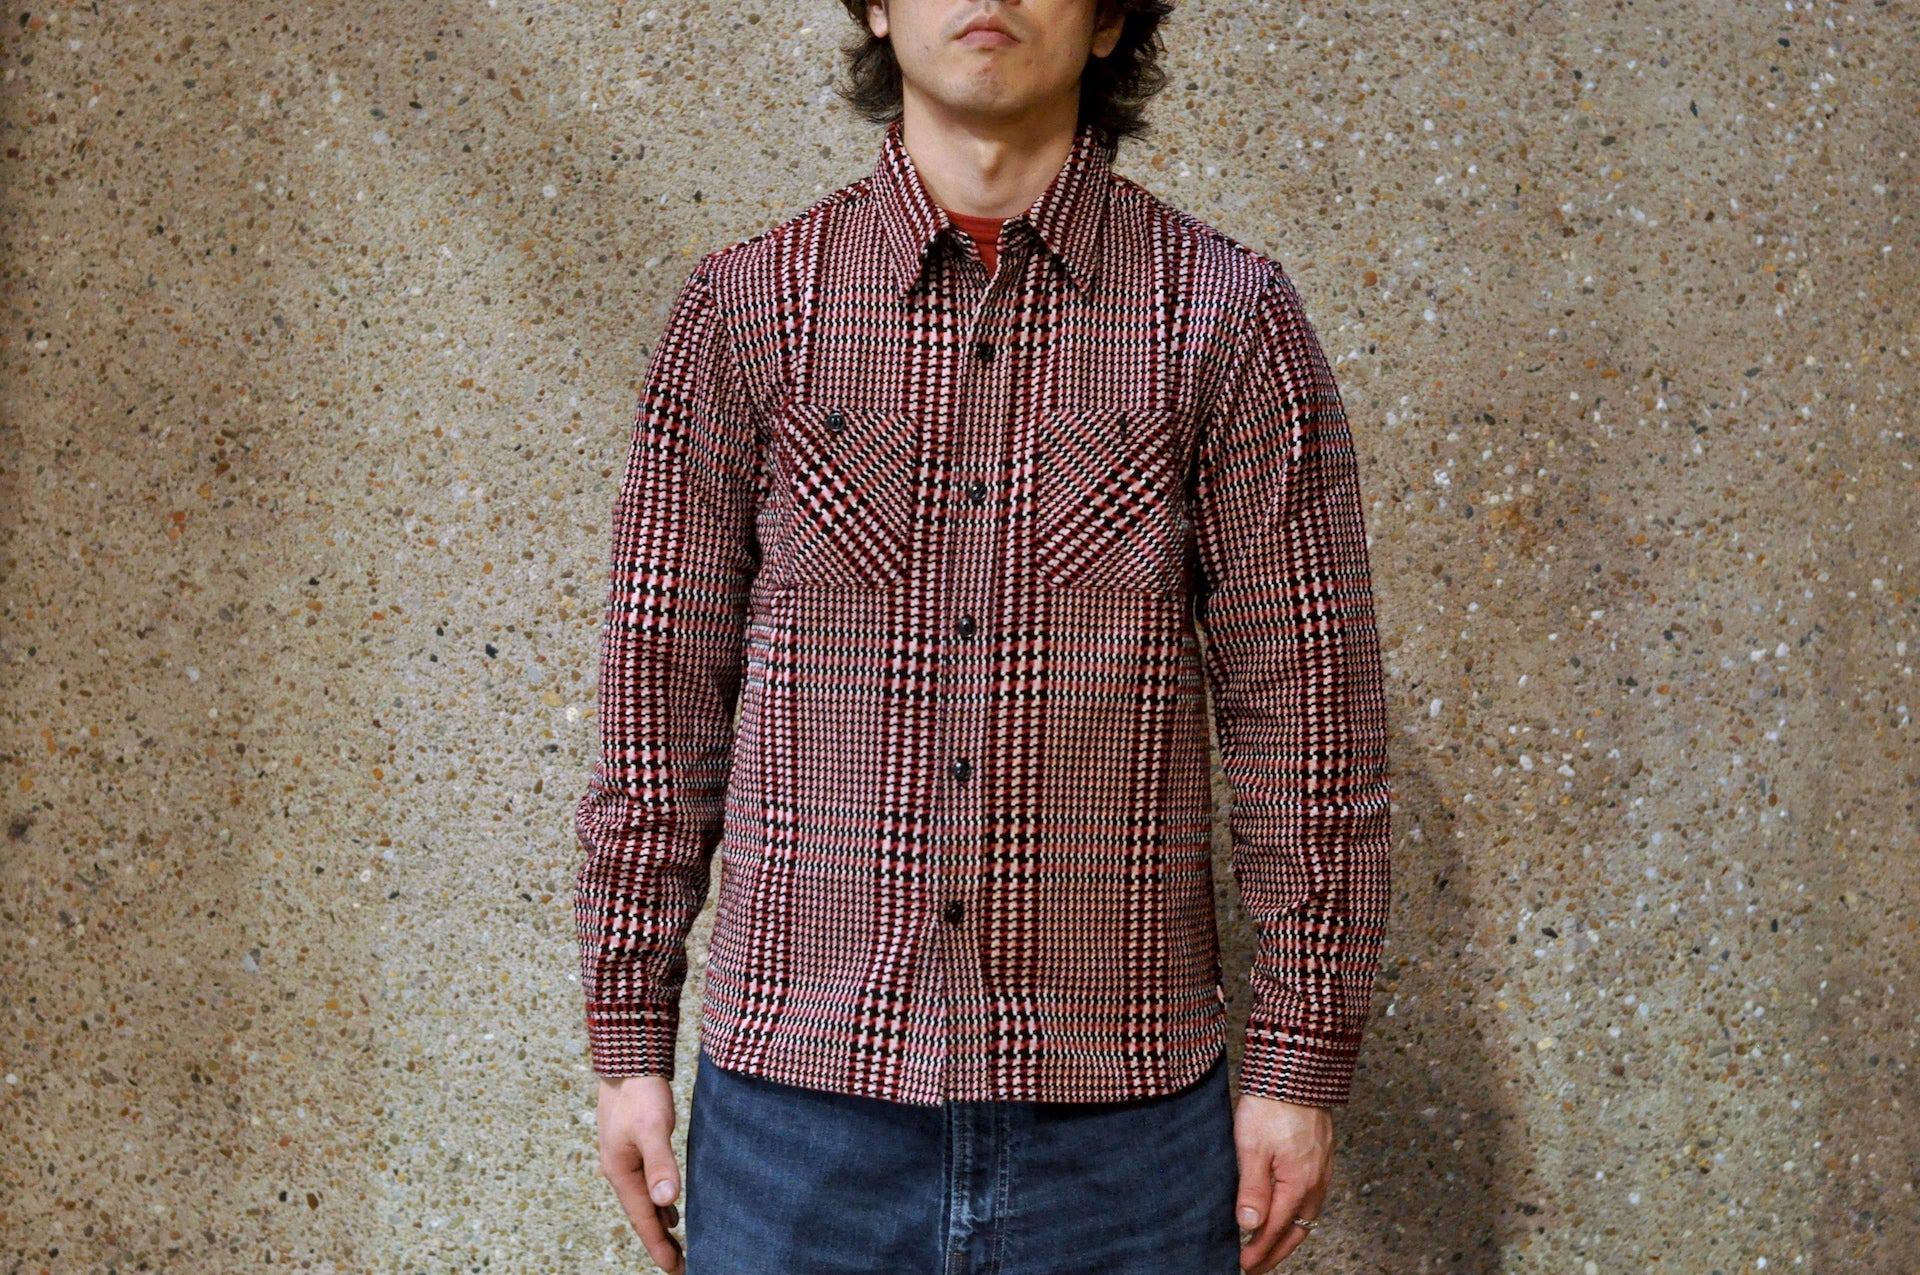 The Flat Head 12oz Glencheck Selvage Flannel Workshirt (Wine)